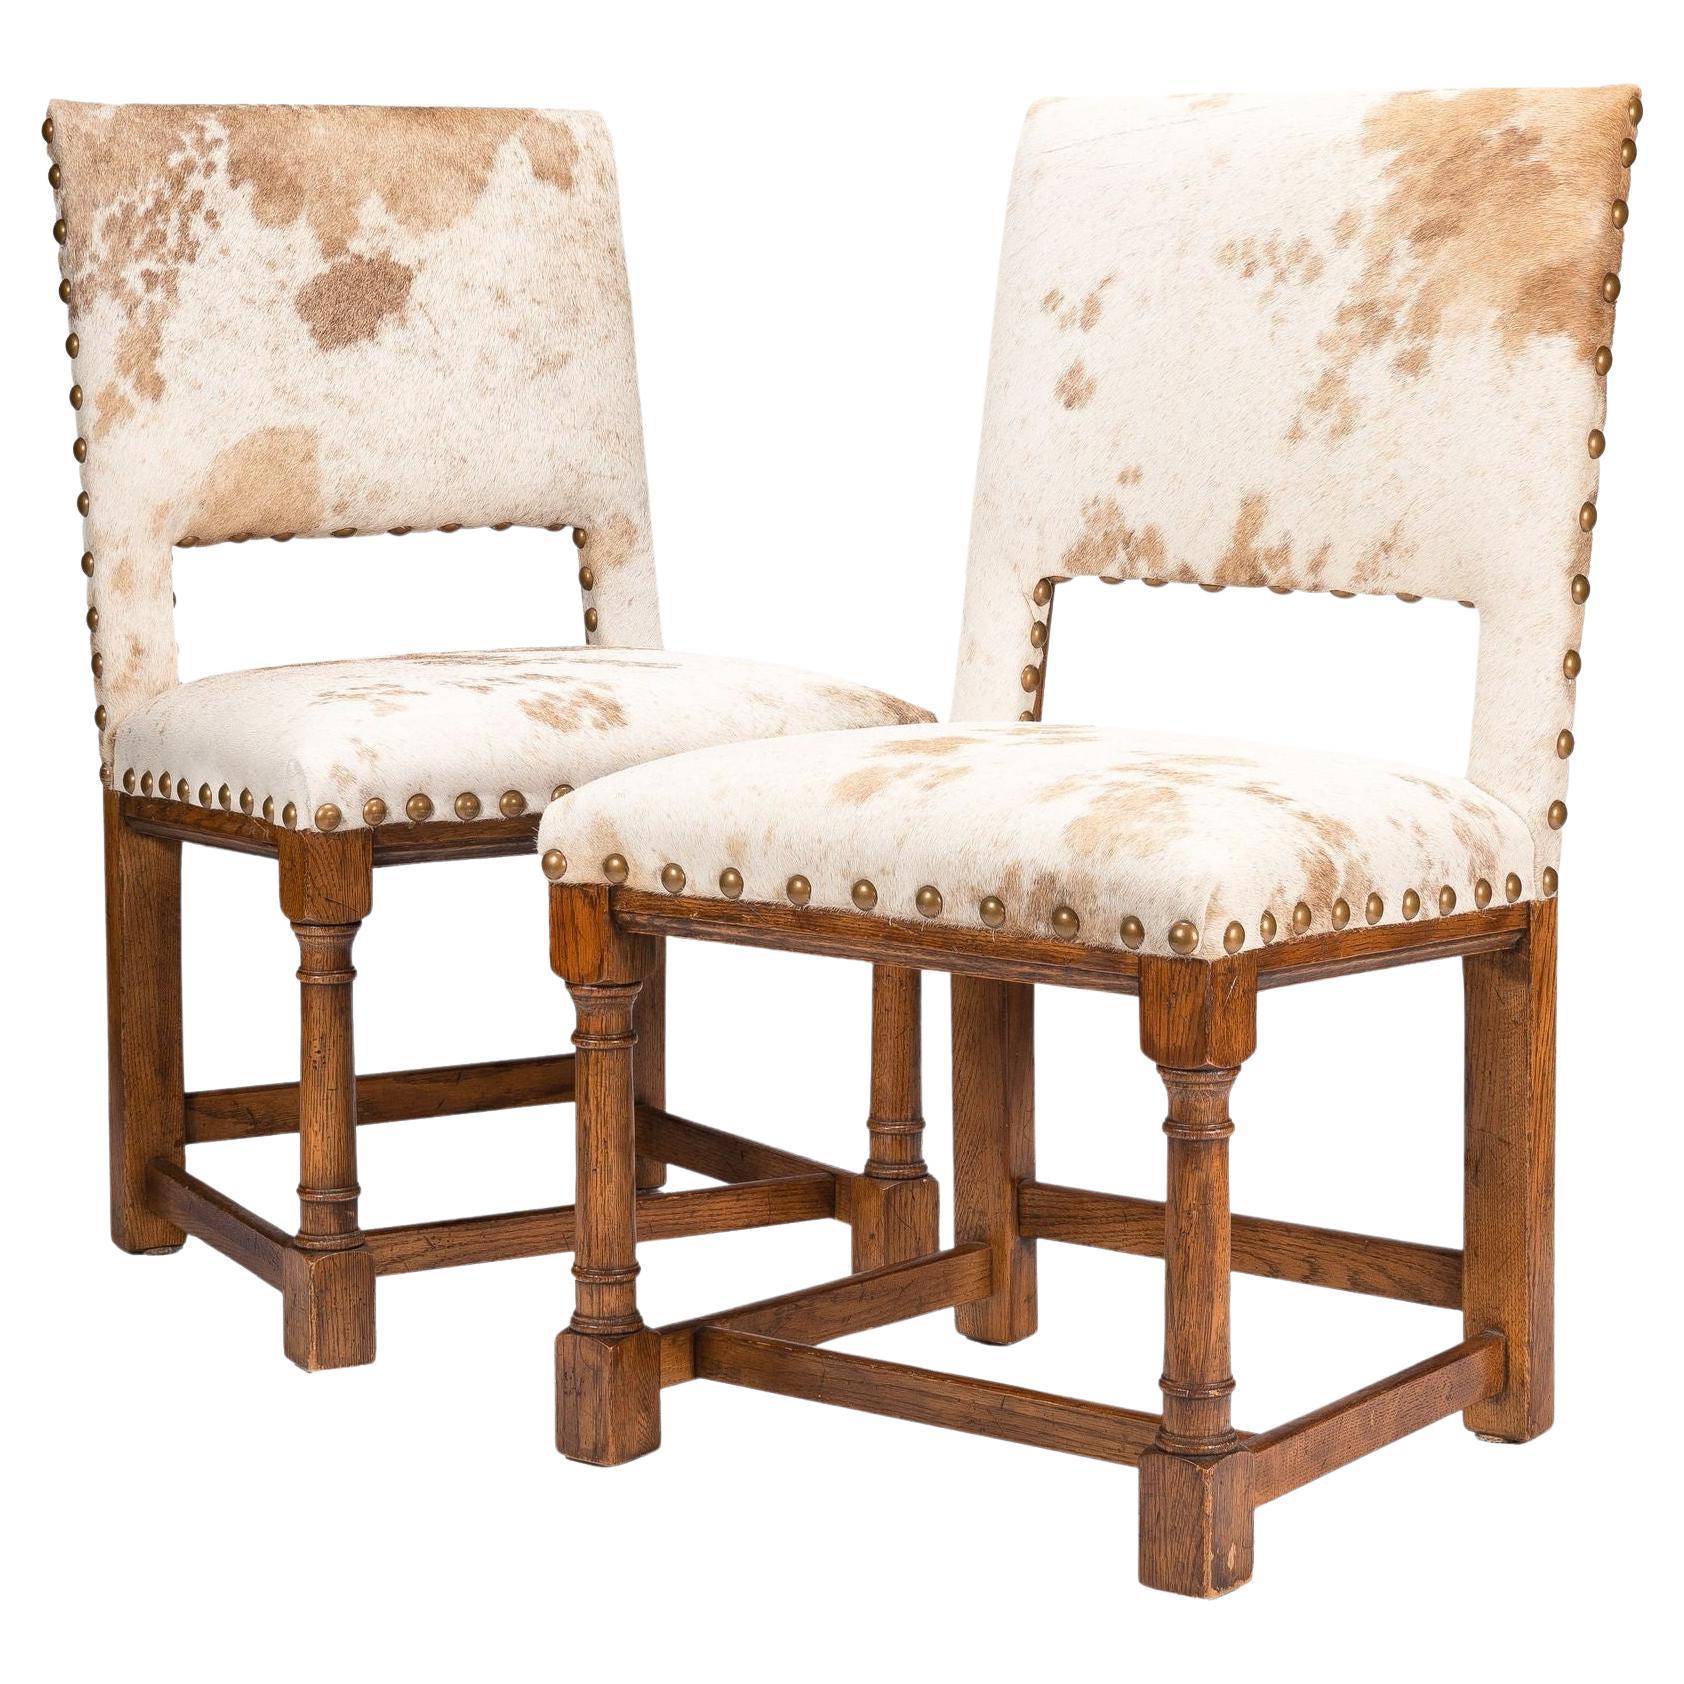 Pair of Jacobean style hair on hide oak side chairs, 1920-35 For Sale